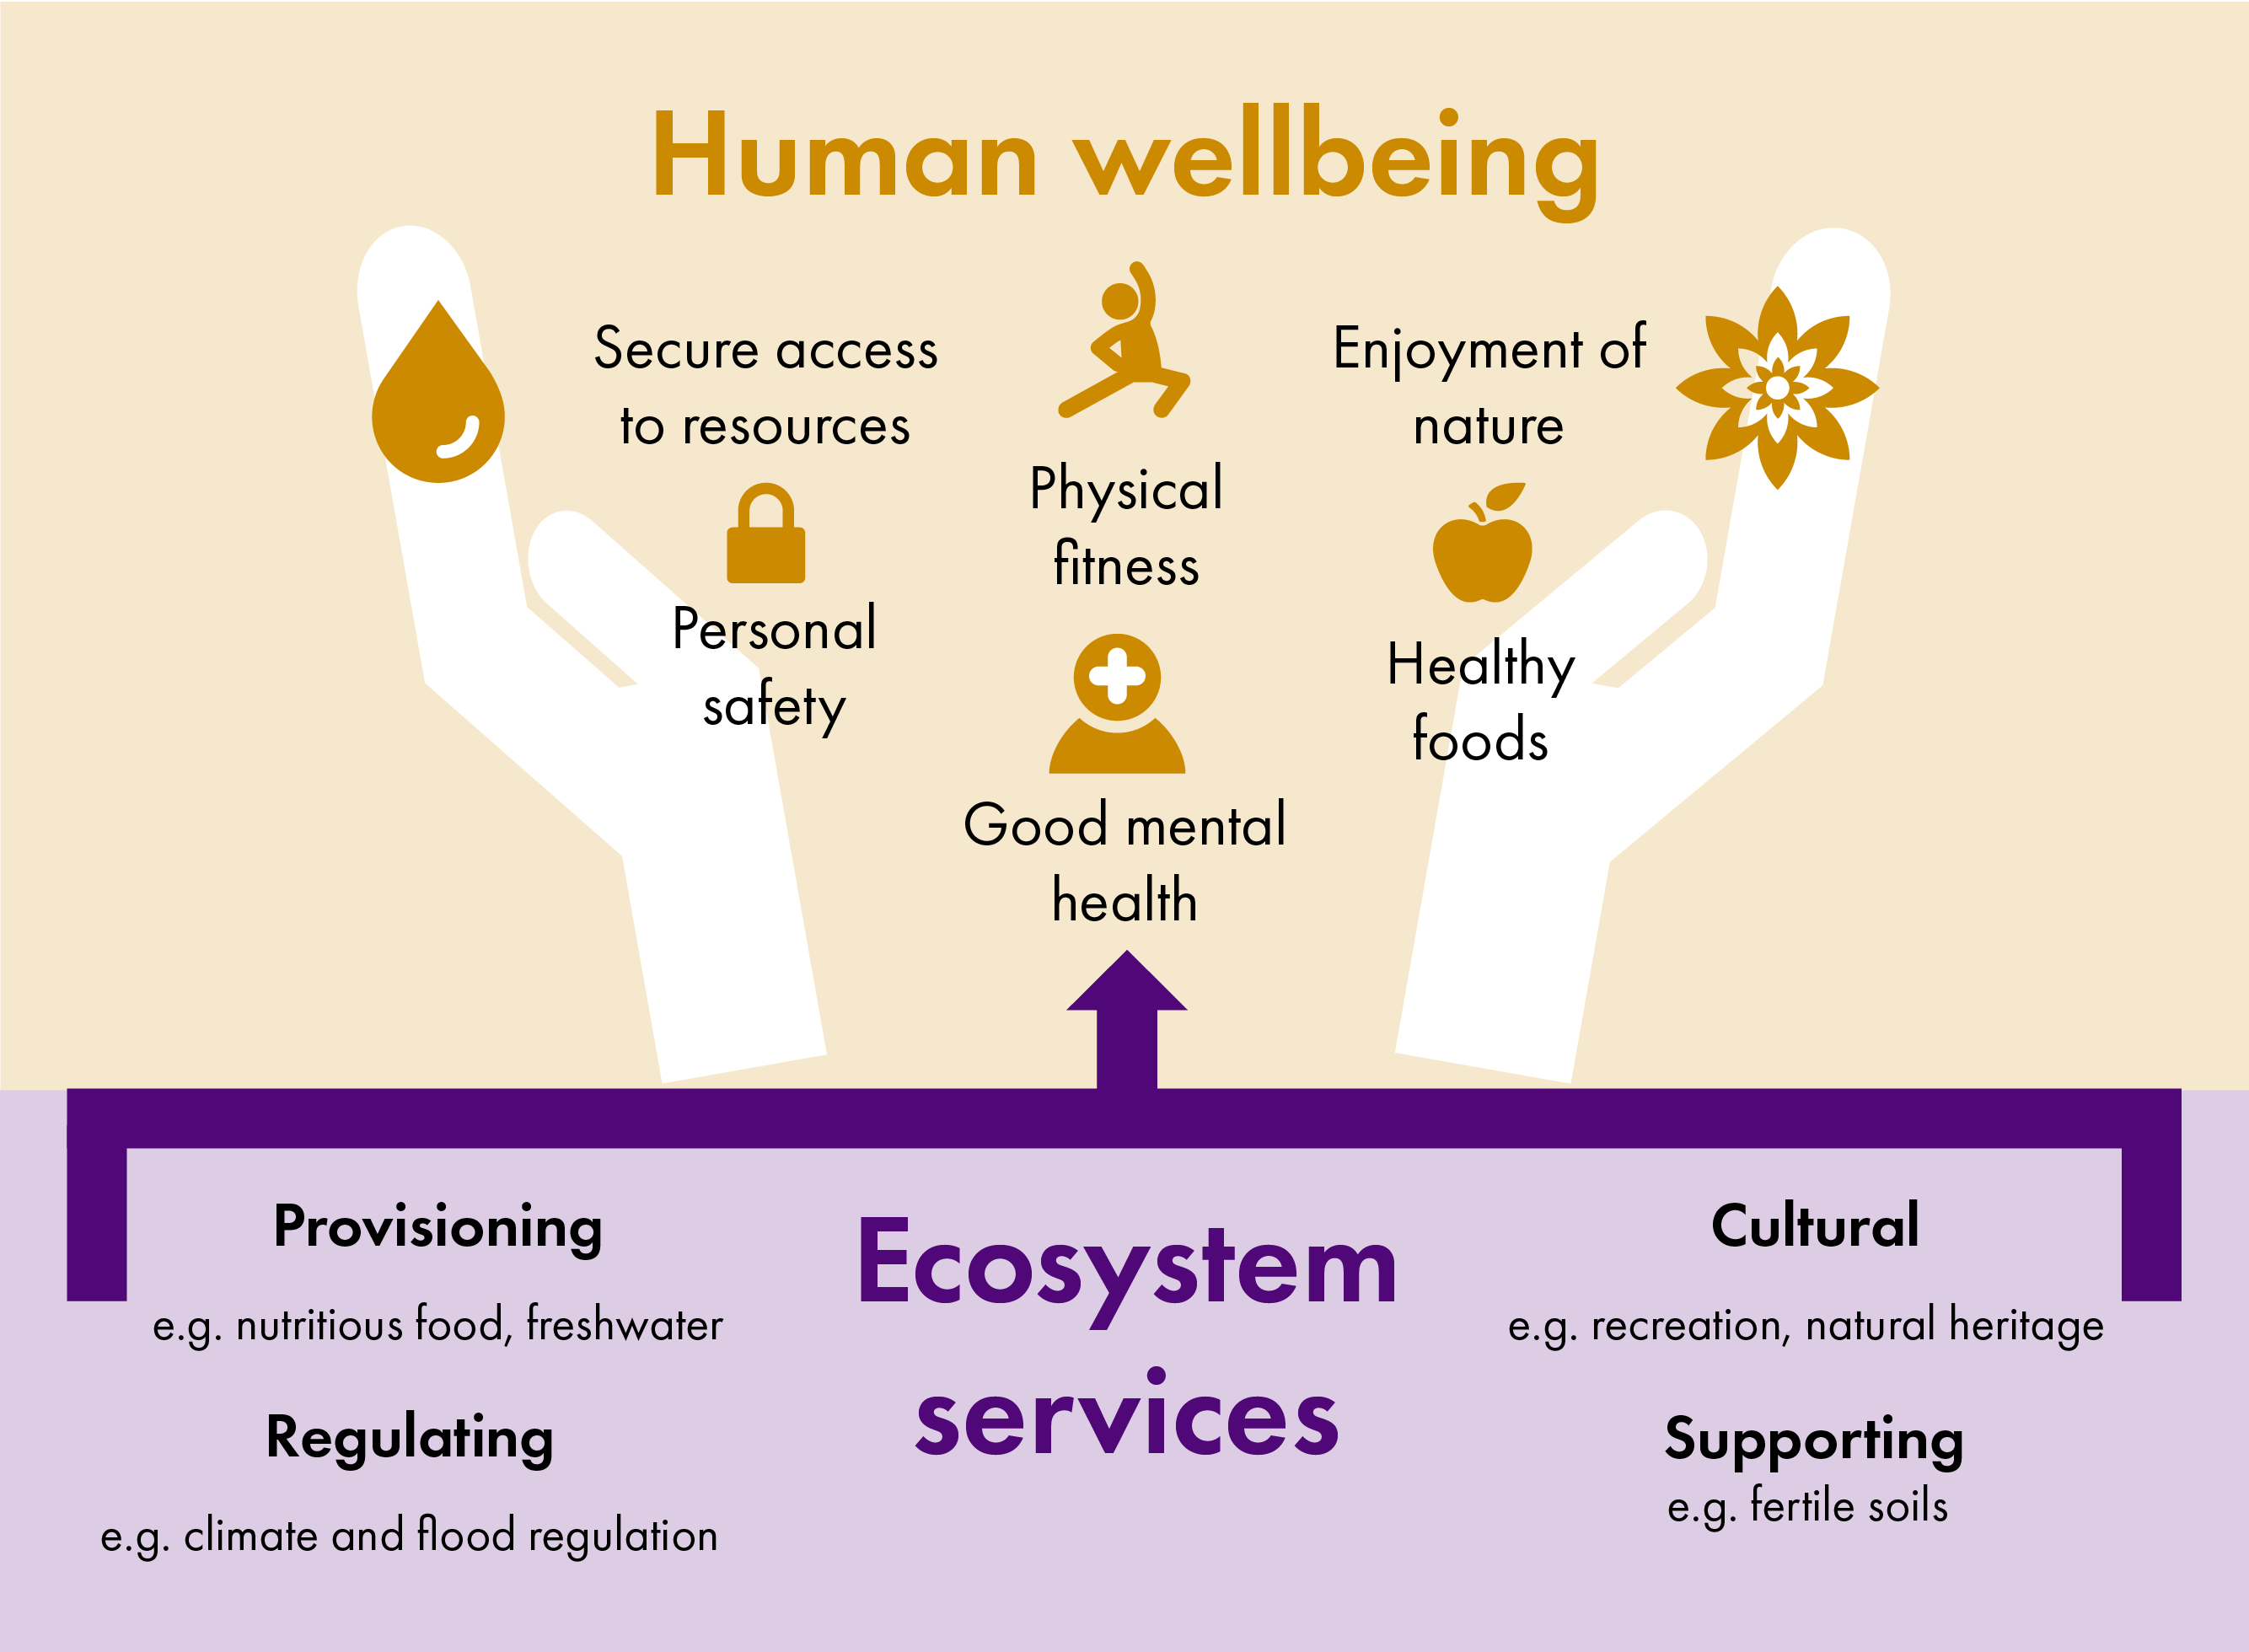 Diagram showing how ecosystem services such as nutritious food, opportunities for recreation, climate and flood regulation and fertile soils support human wellbeing. Aspects of human wellbeing include secure access to resources, personal safety, physical fitness, good mental health, enjoyment of nature and healthy foods.